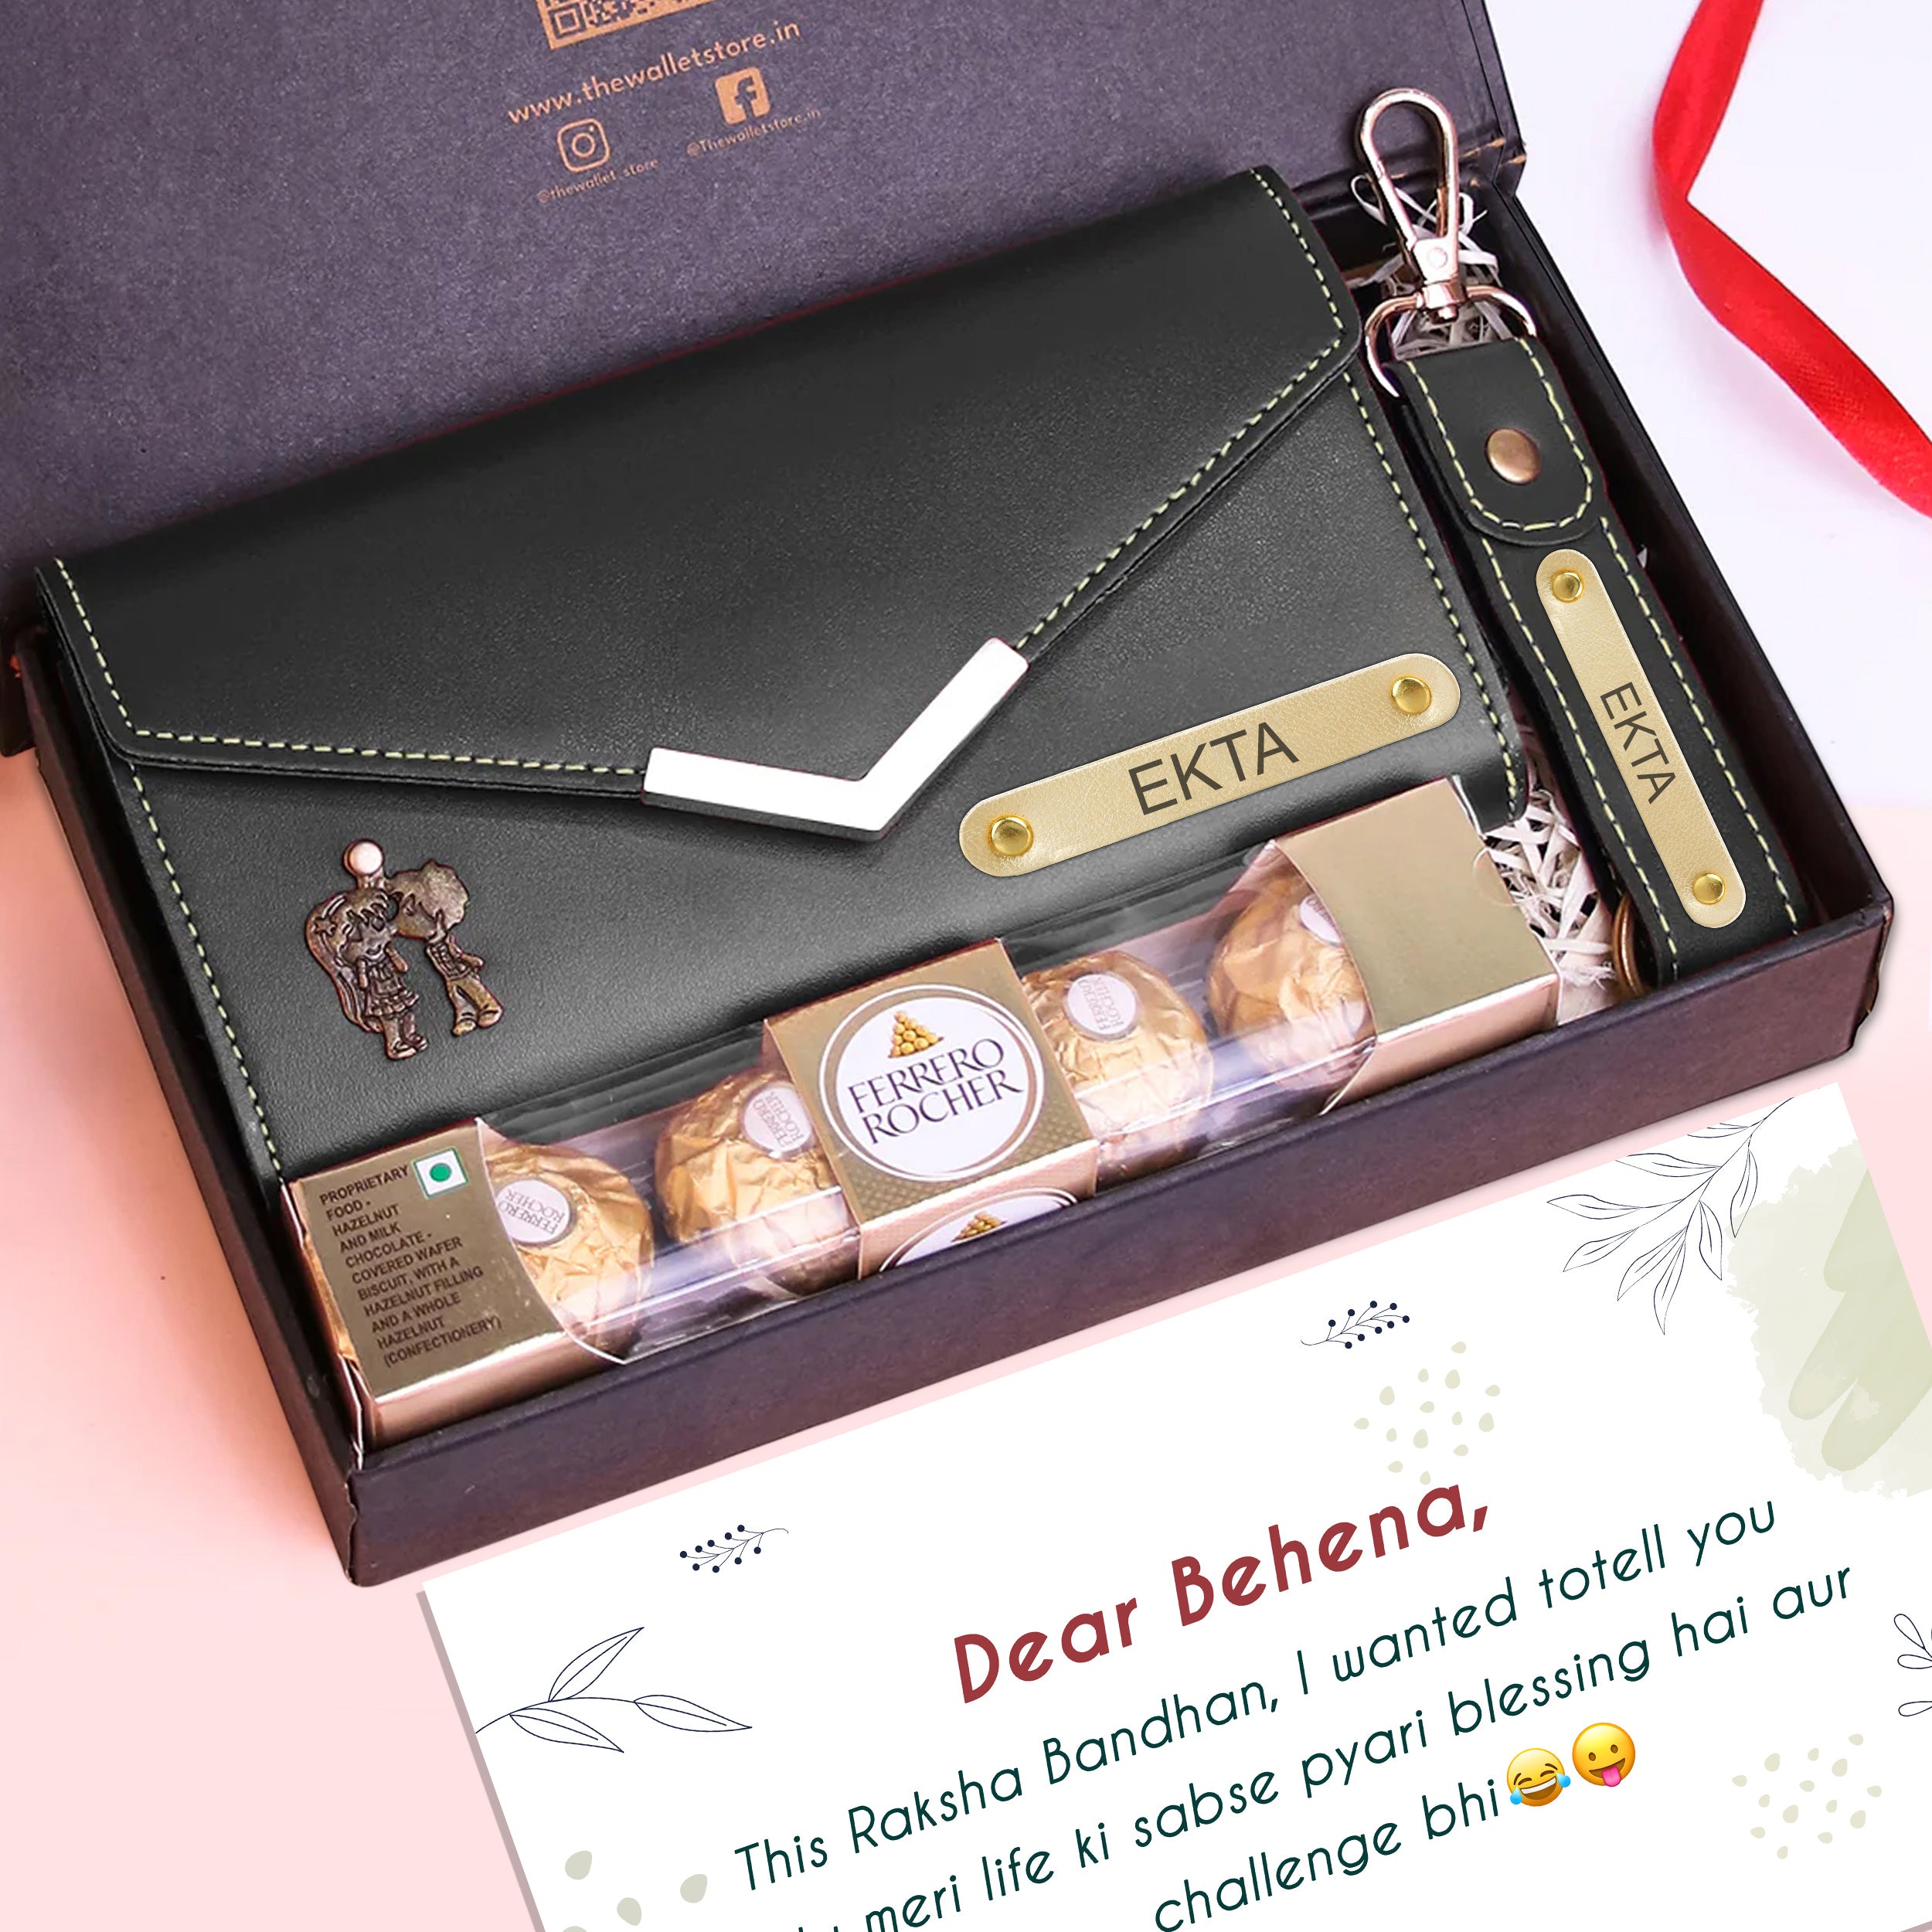 Personalized Premium Leather Clutch Keychain & Chocolate Gift Set